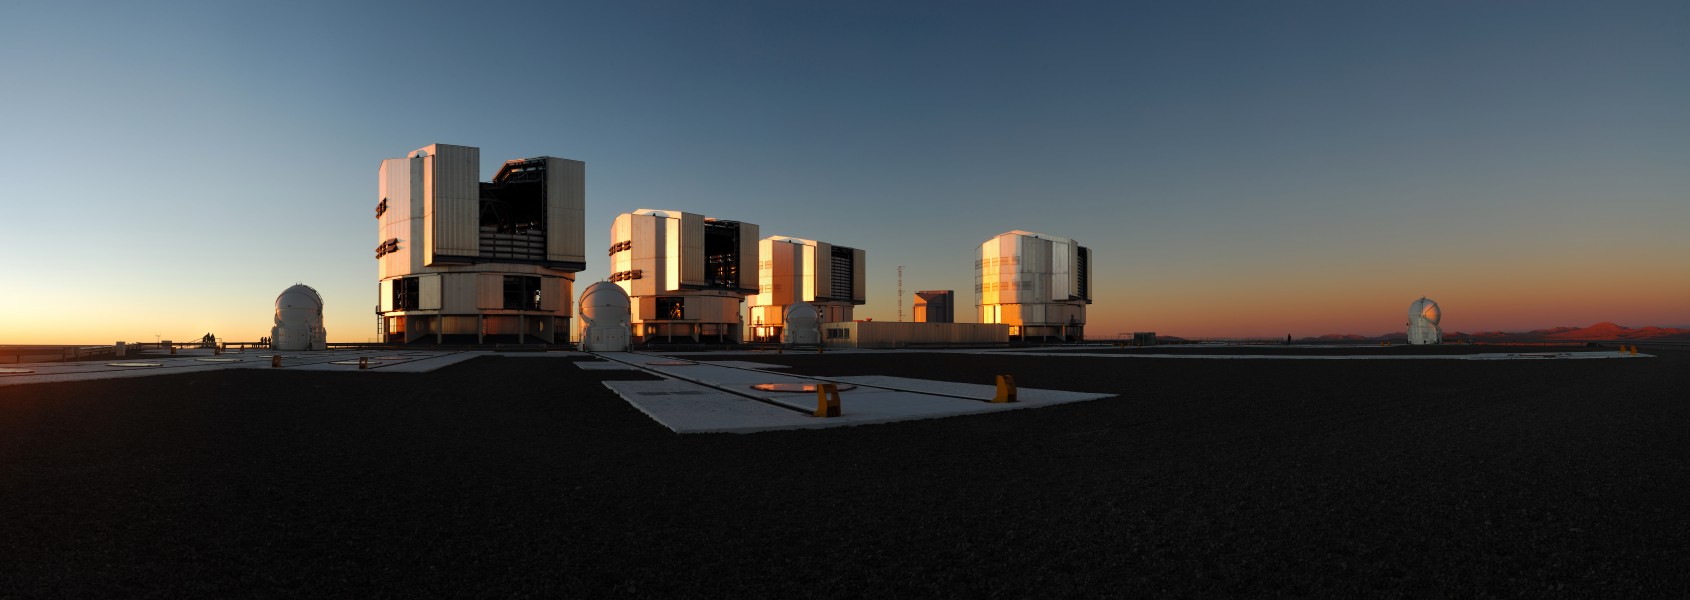 Sunset over Paranal Panorama (full size)